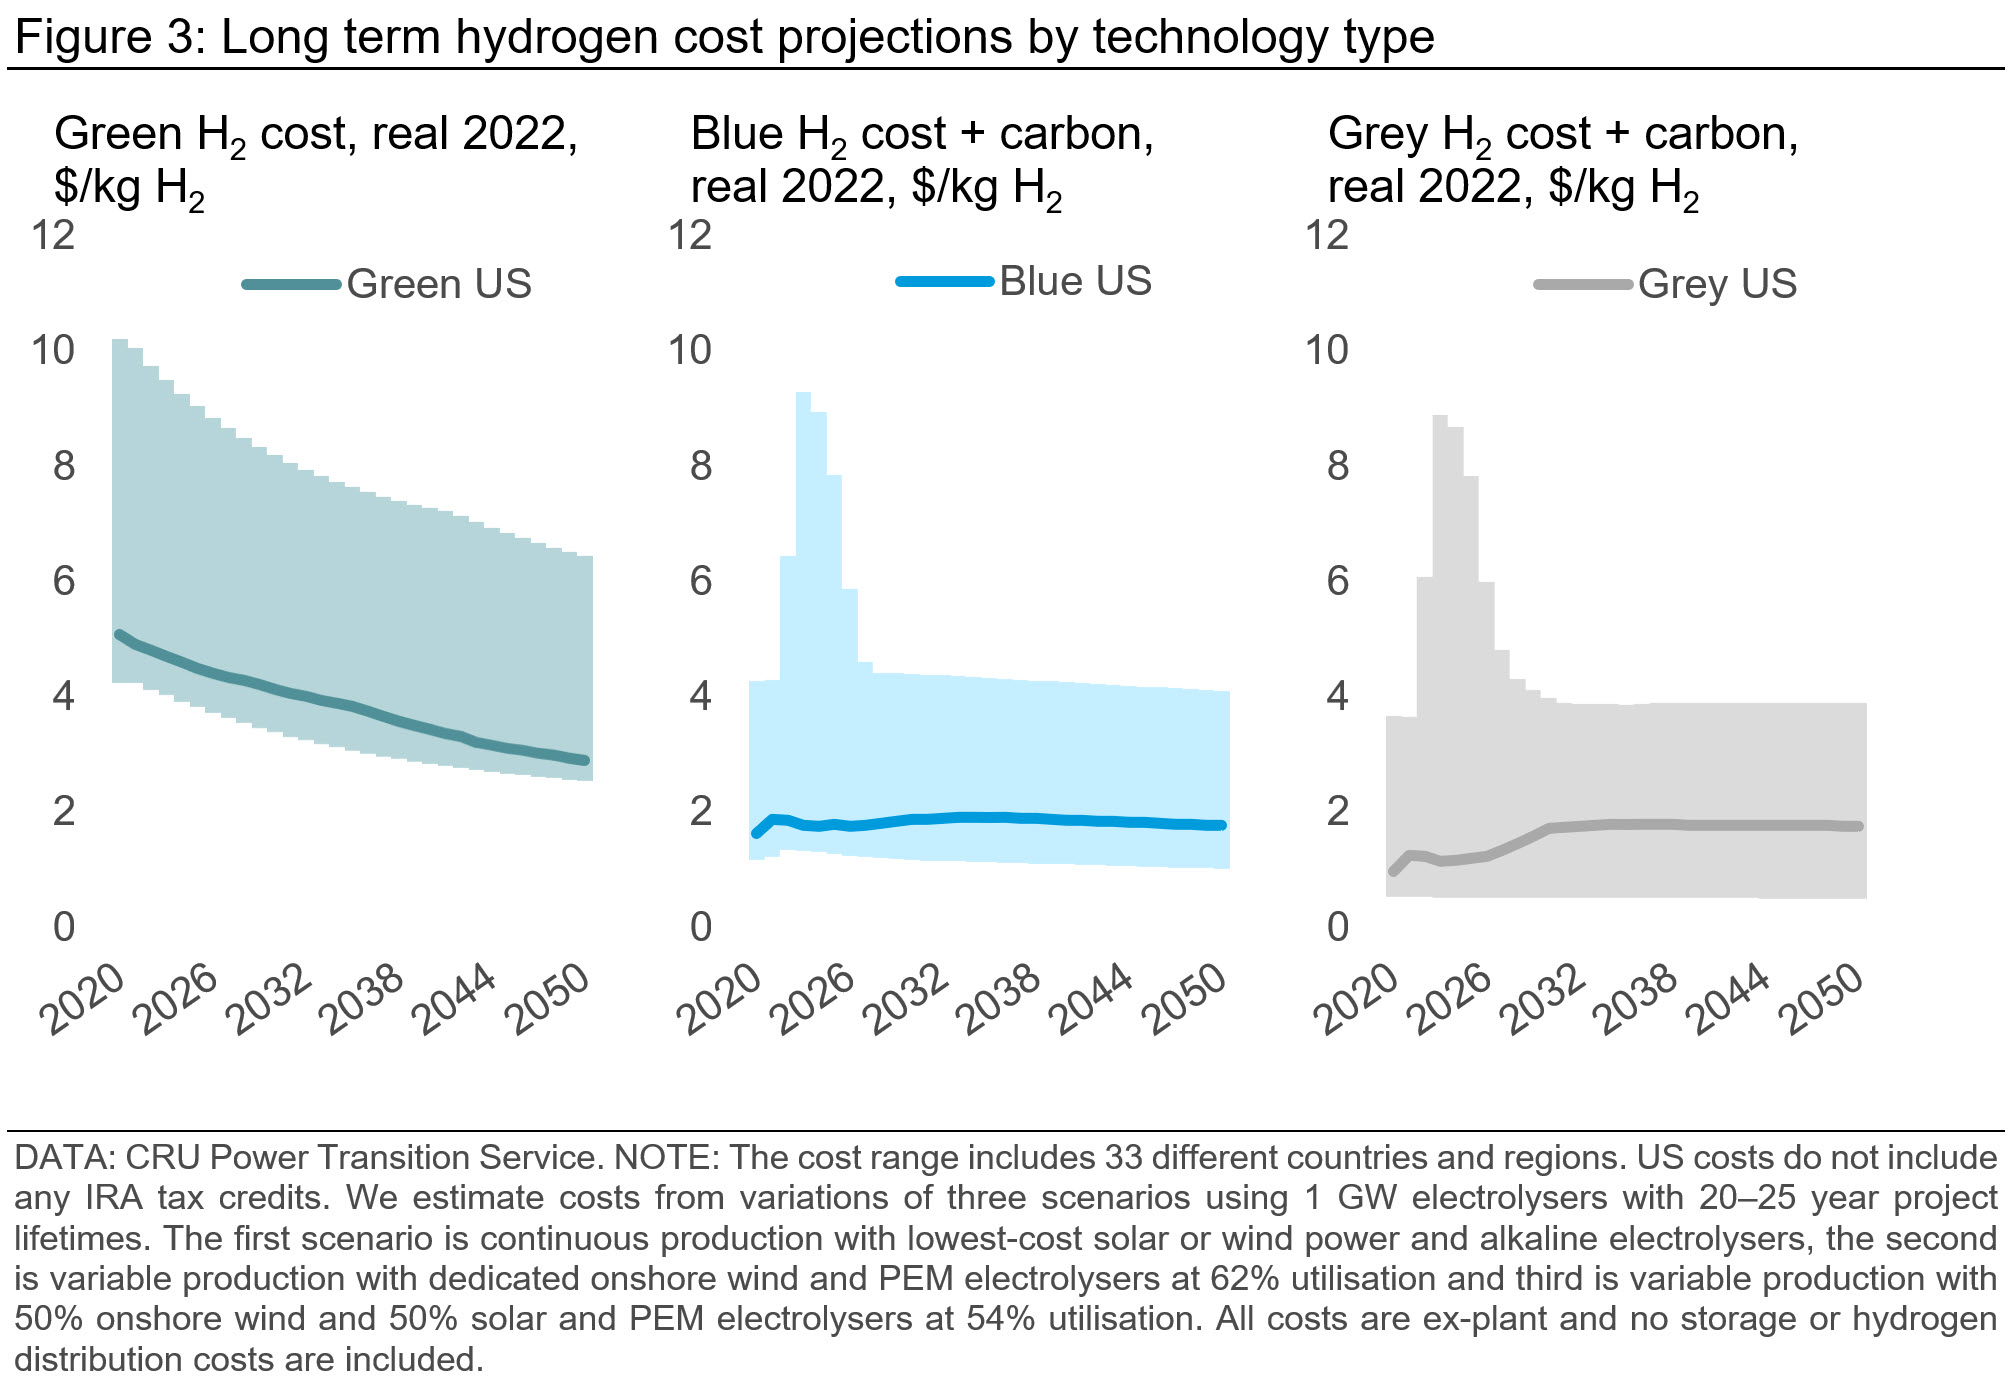 Graph showing long term hydrogen cost projections by technology type